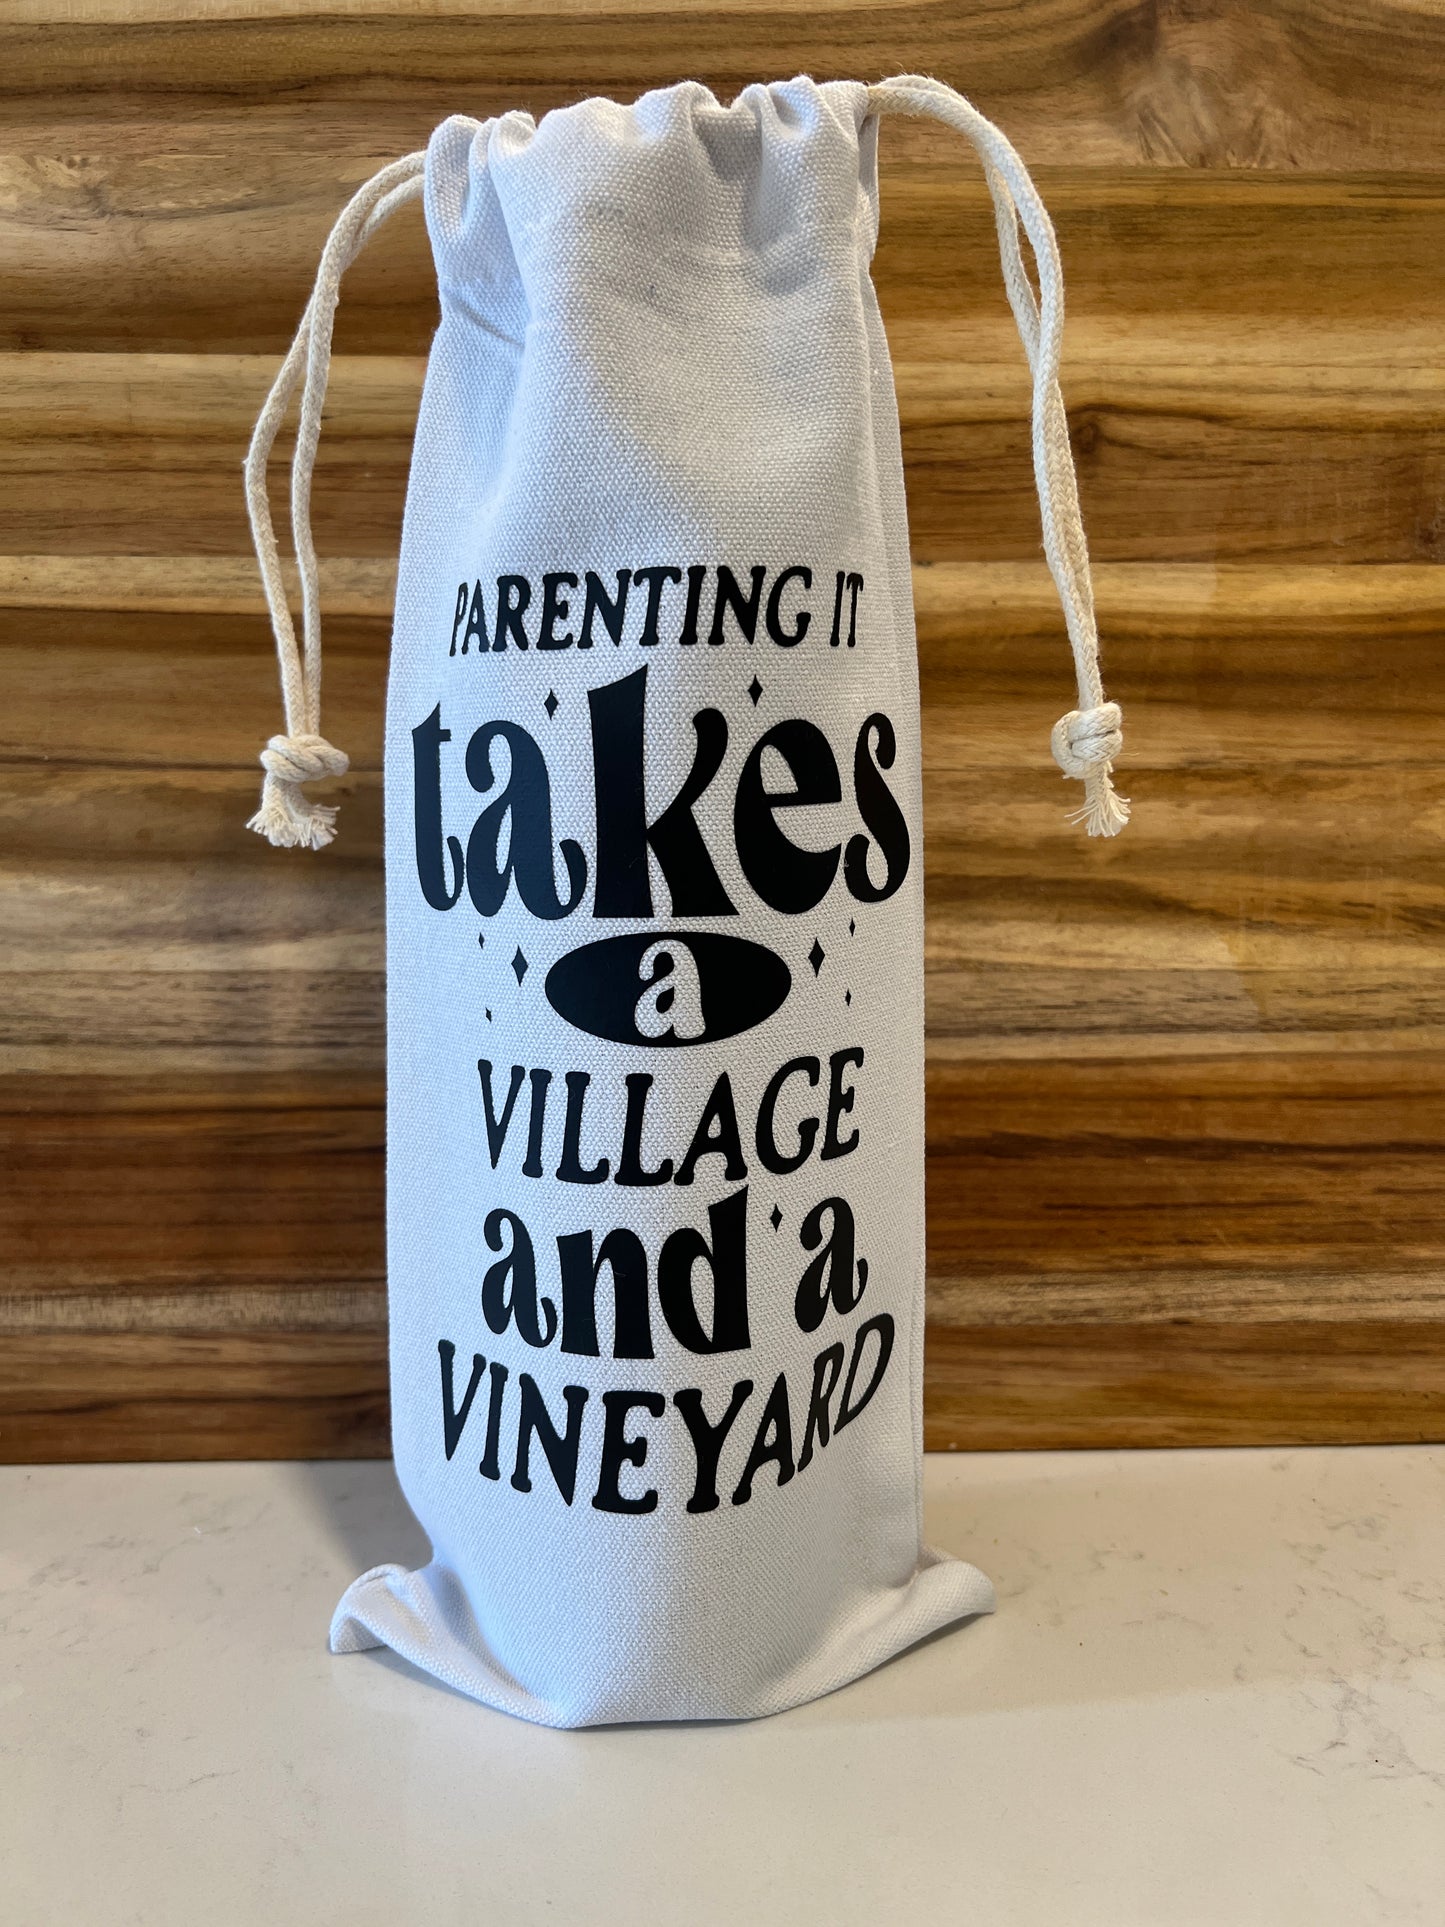 Parenting takes a village and a vineyard Canvas Wine bag